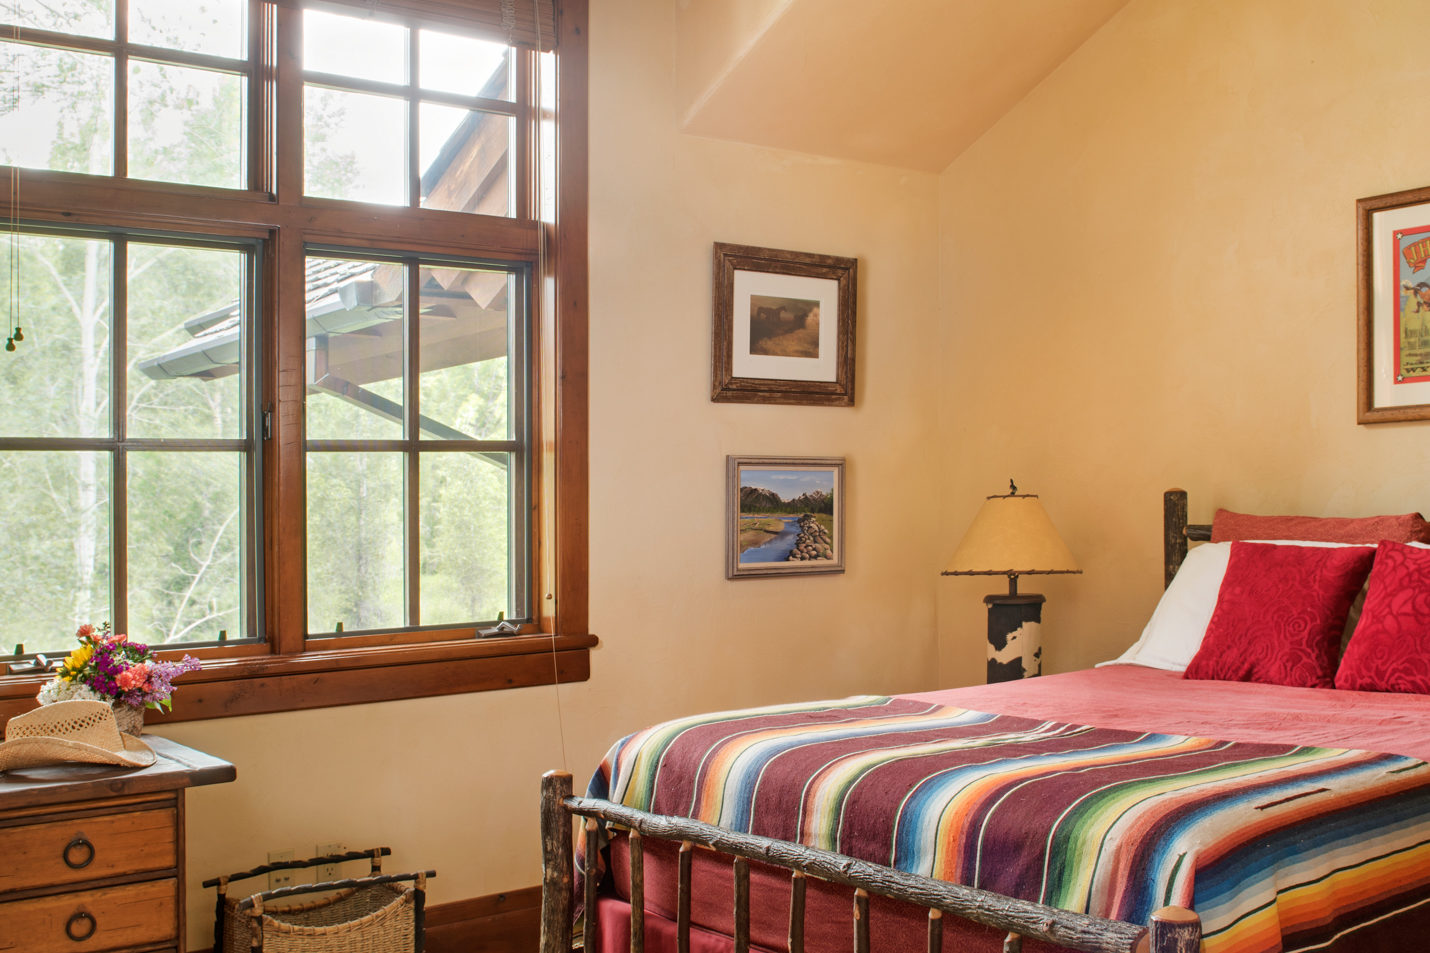 A bedroom with a queen sized bed and western artwork